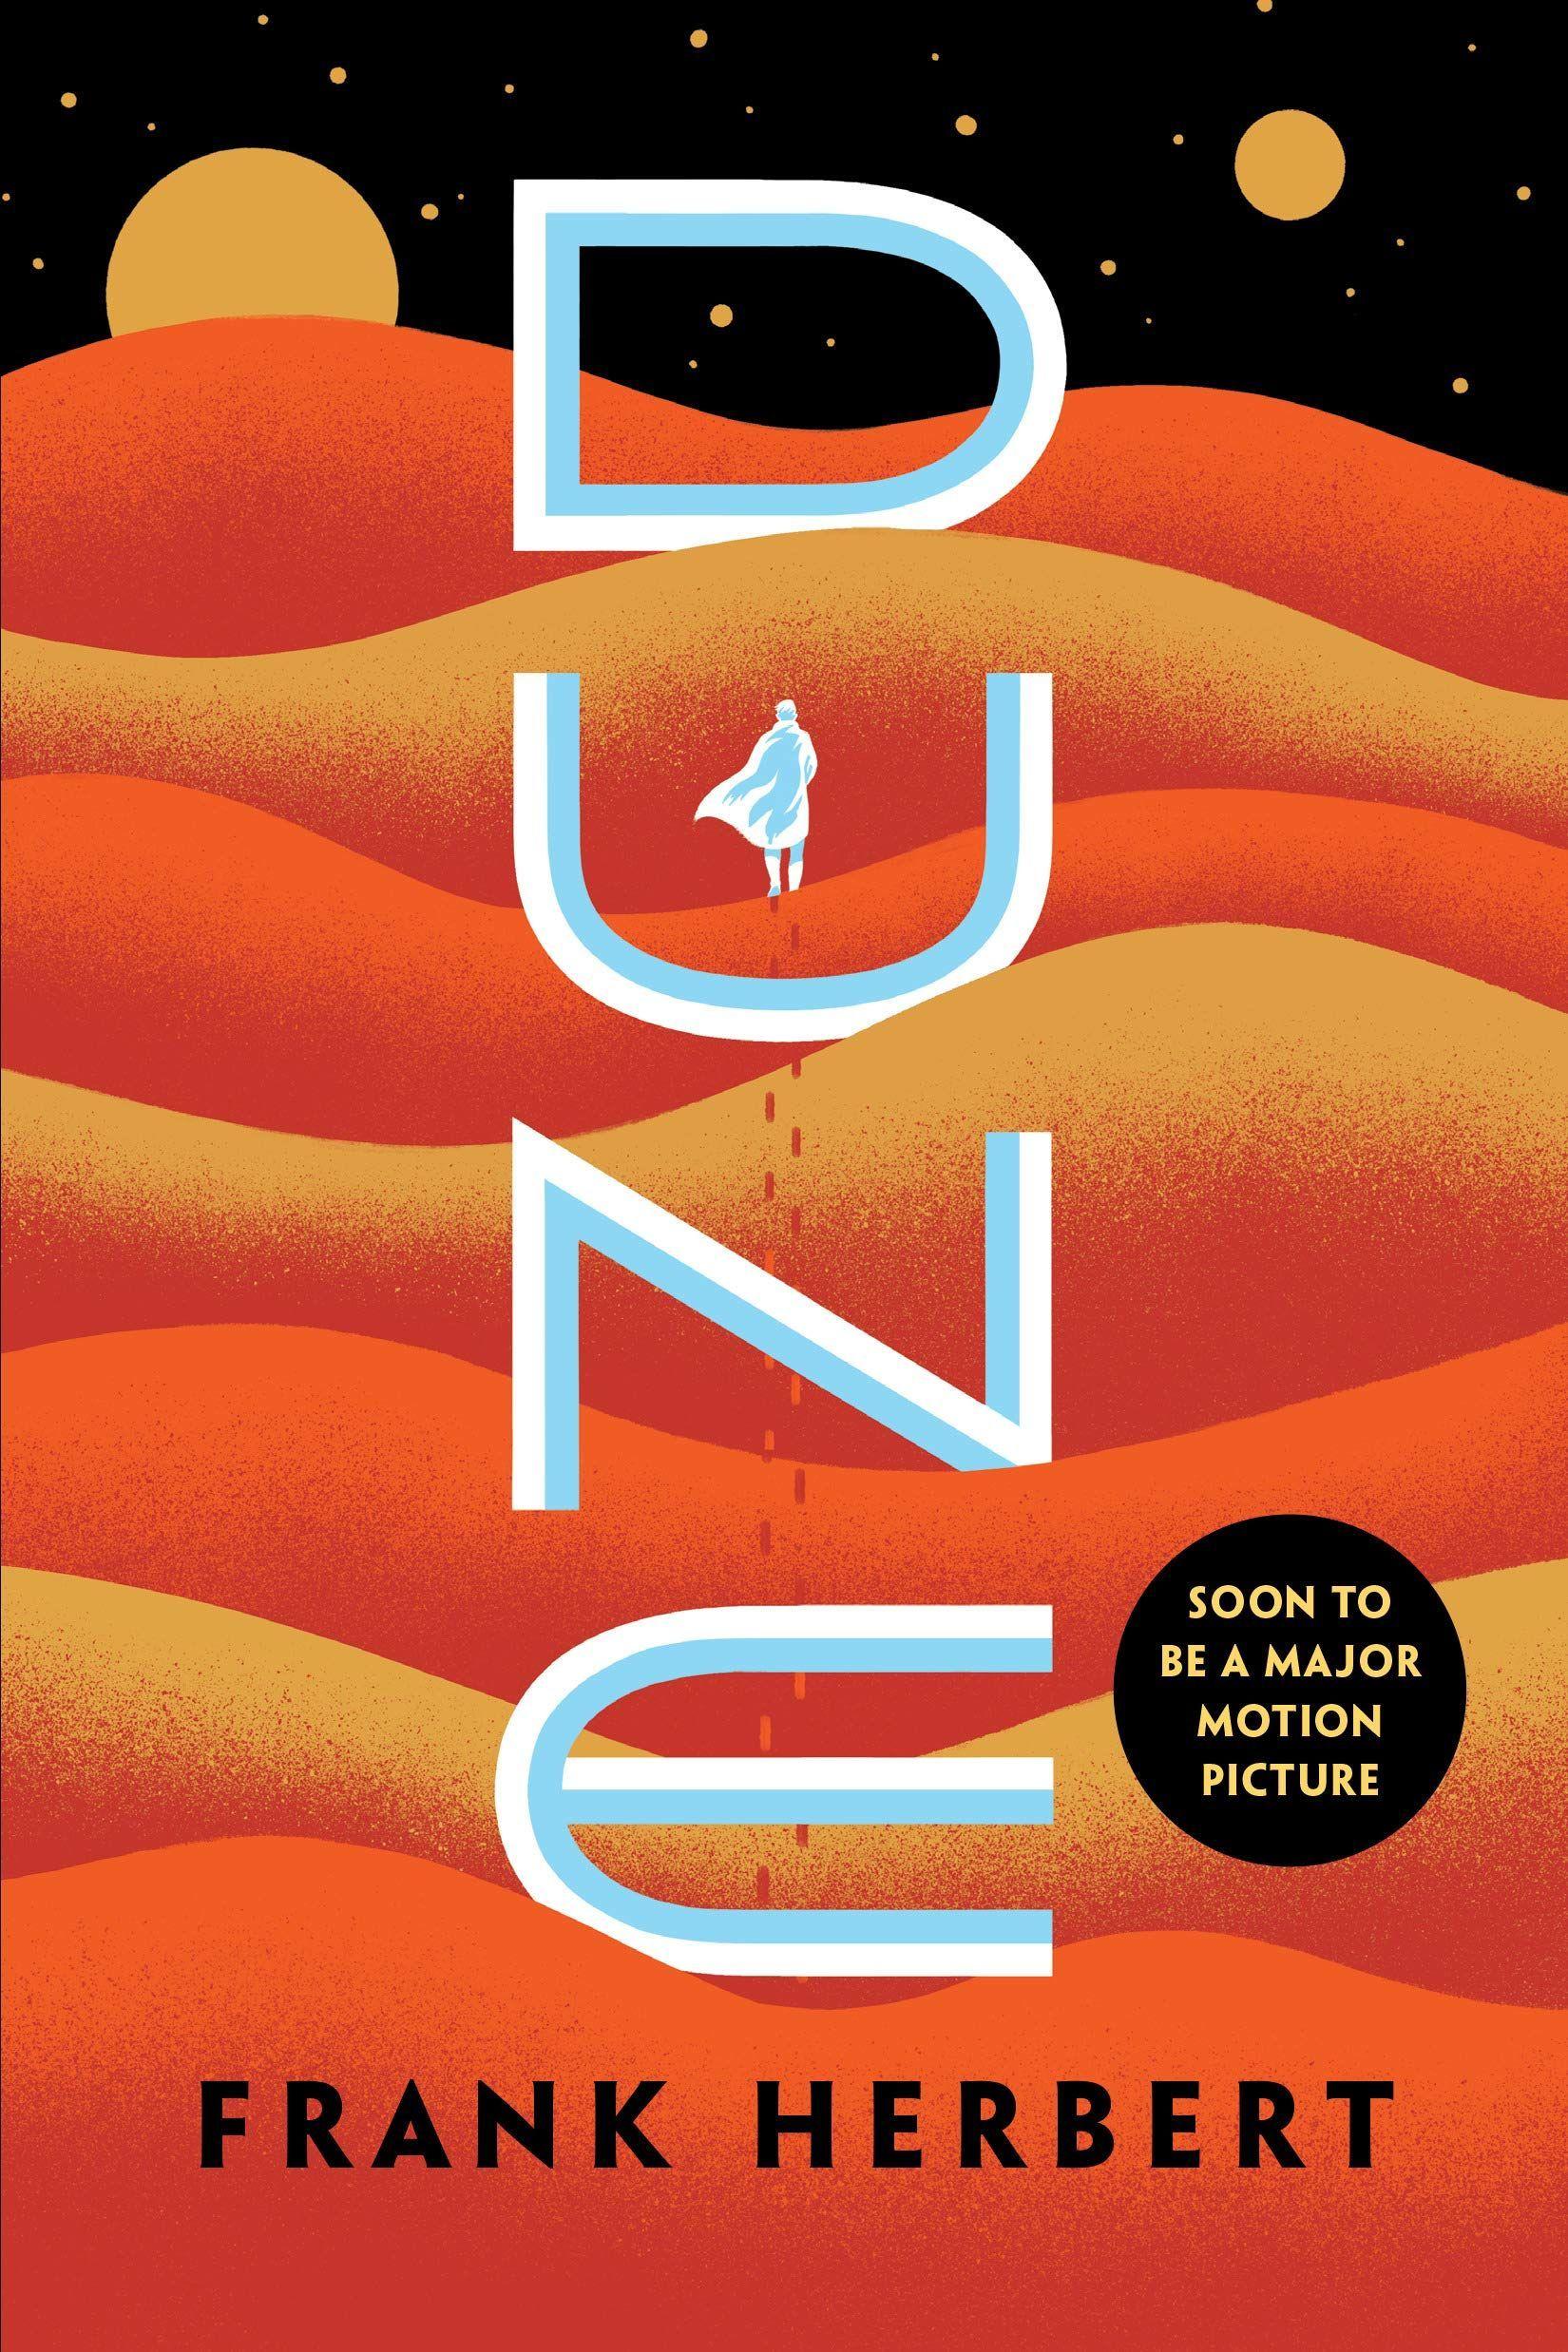 Race Consciousness: Fascism and Frank Herbert’s “Dune” | Los Angeles Review of Books